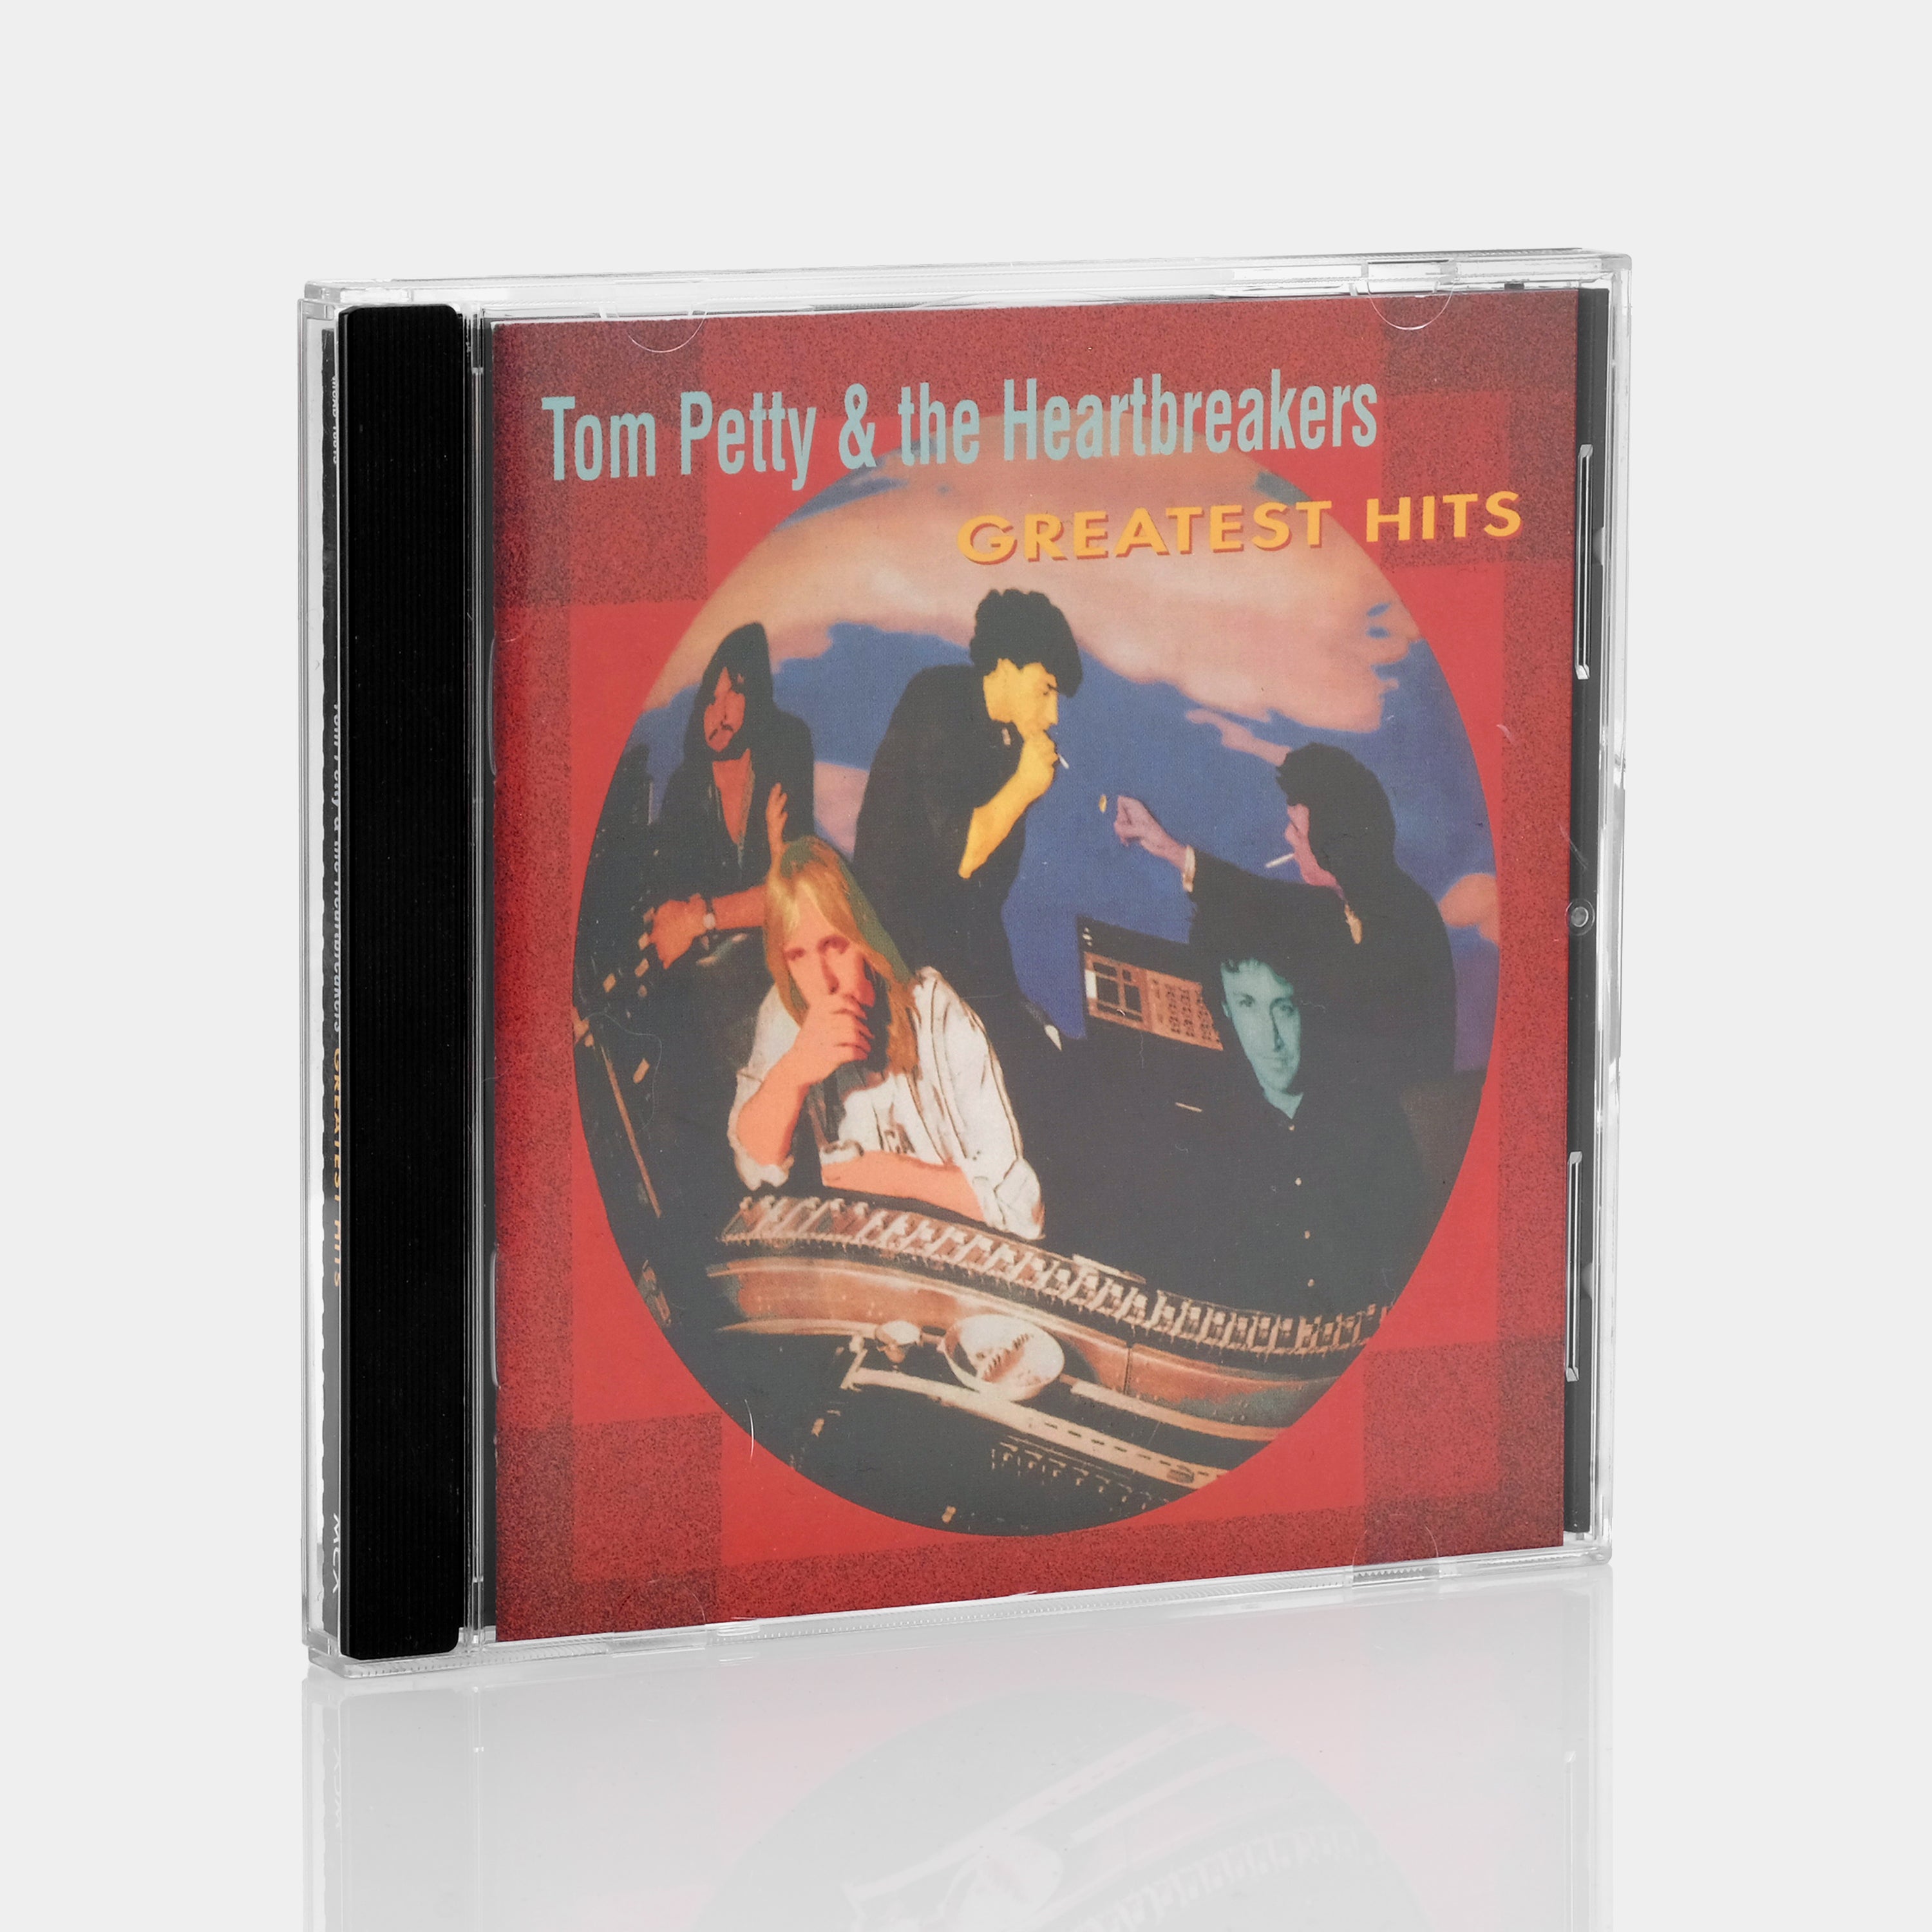 Tom Petty & The Heartbreakers - Greatest Hits CD